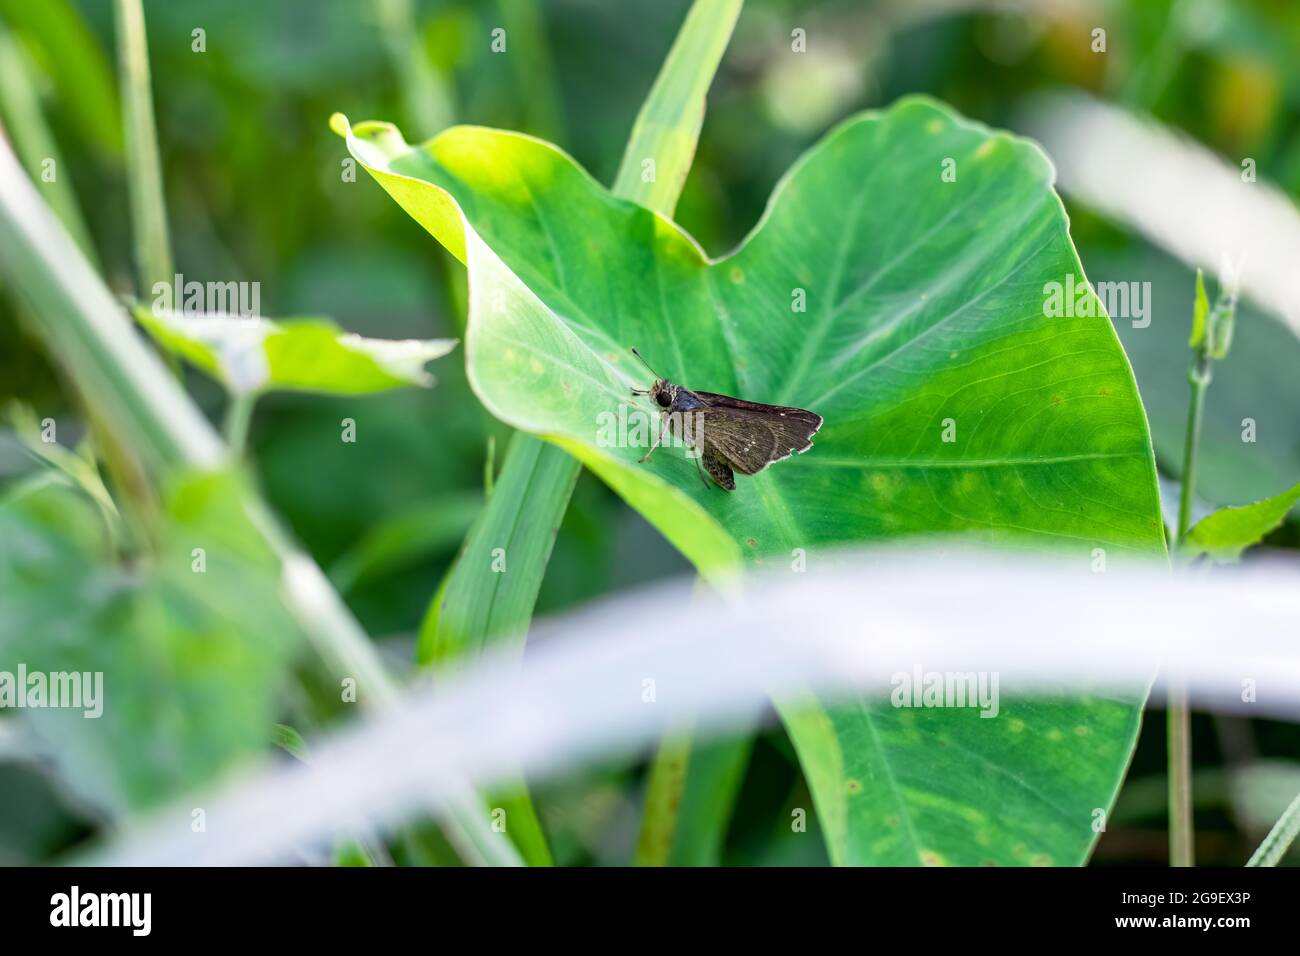 A small brown butterfly sitting on a taro leaf in the jungle Stock Photo